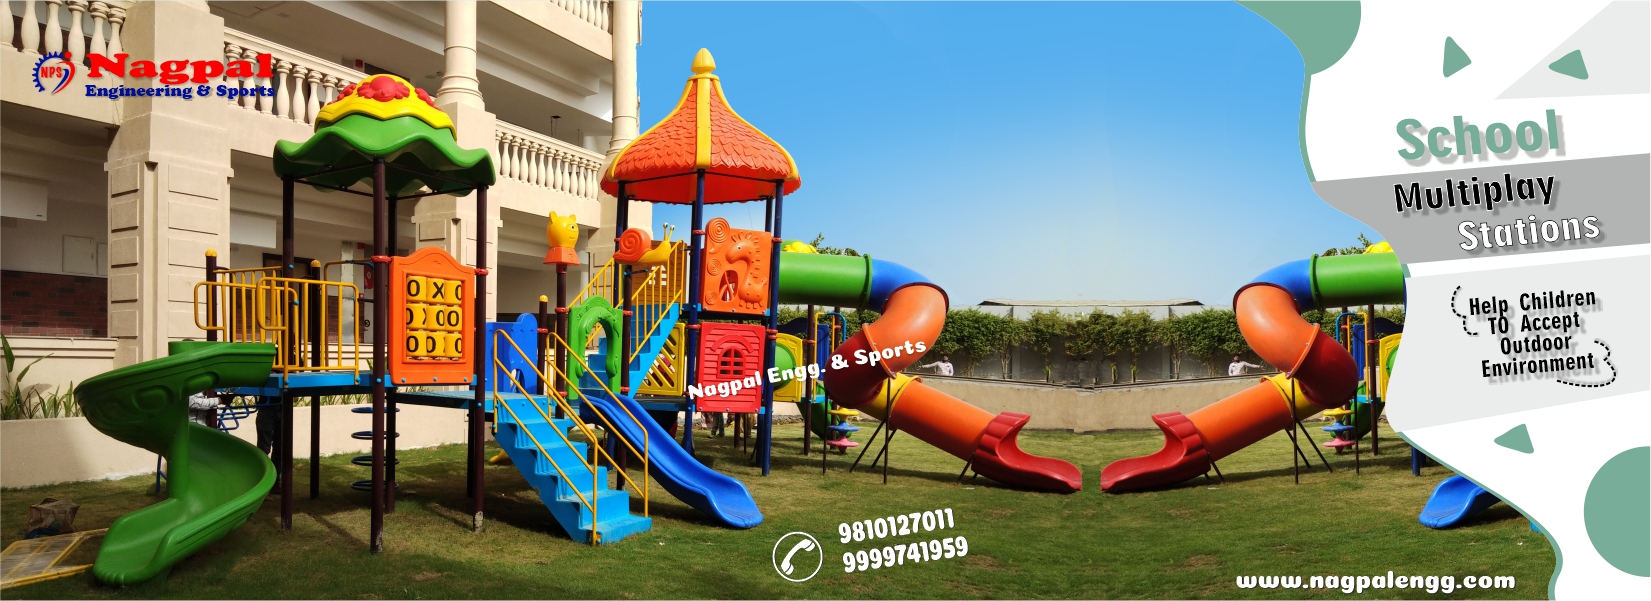 Roto Multiplay System Manufacturers, Exporters & Suppliers in Dholpur